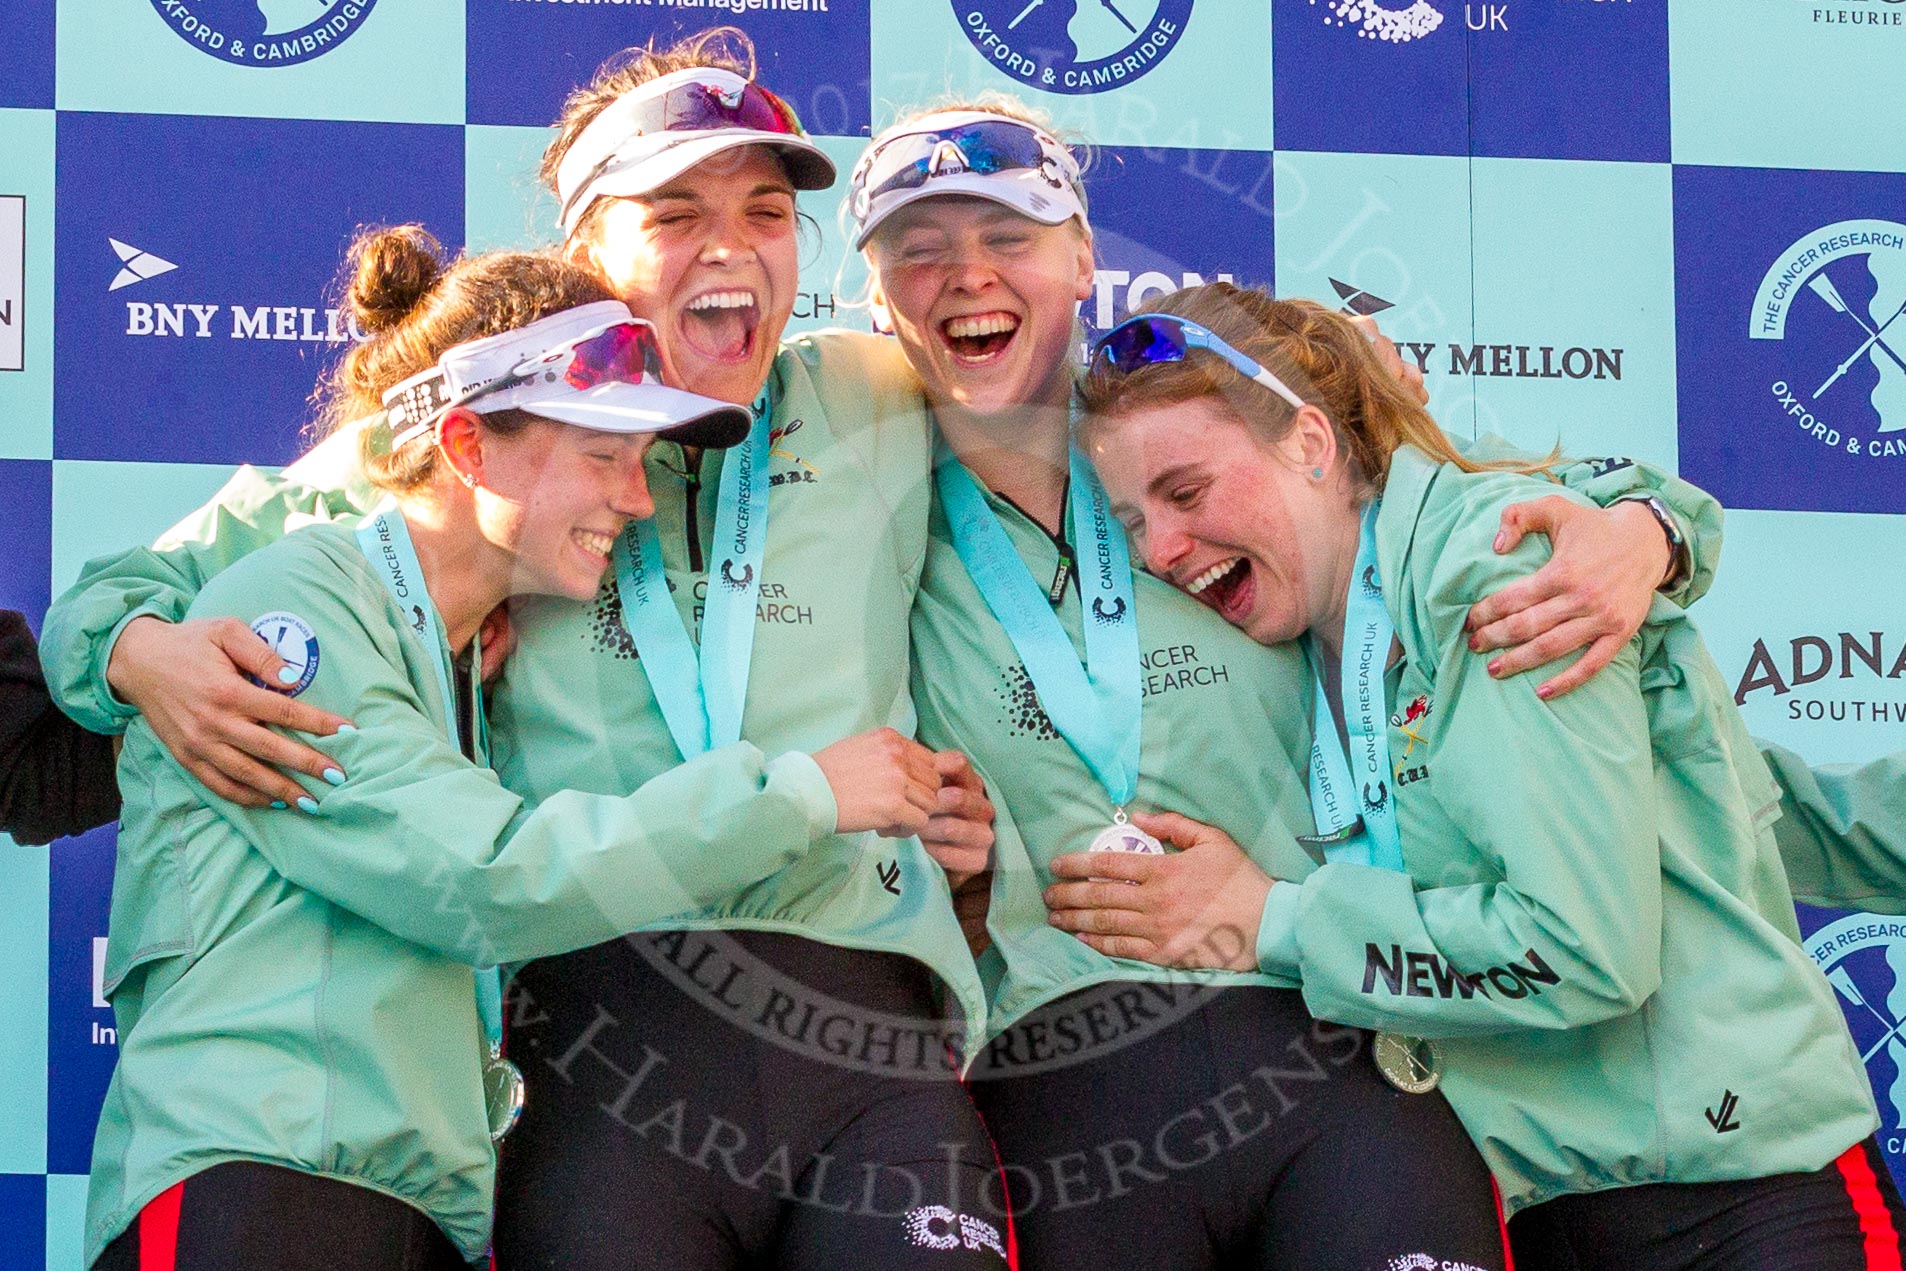 The Boat Race season 2017 -  The Cancer Research Women's Boat Race: CUWBC at the price giving - 2 seat Imogen Grant, 3 seat Claire Lambe, 5 seat Holly Hill, 6 seat Alice White.
River Thames between Putney Bridge and Mortlake,
London SW15,

United Kingdom,
on 02 April 2017 at 17:13, image #253